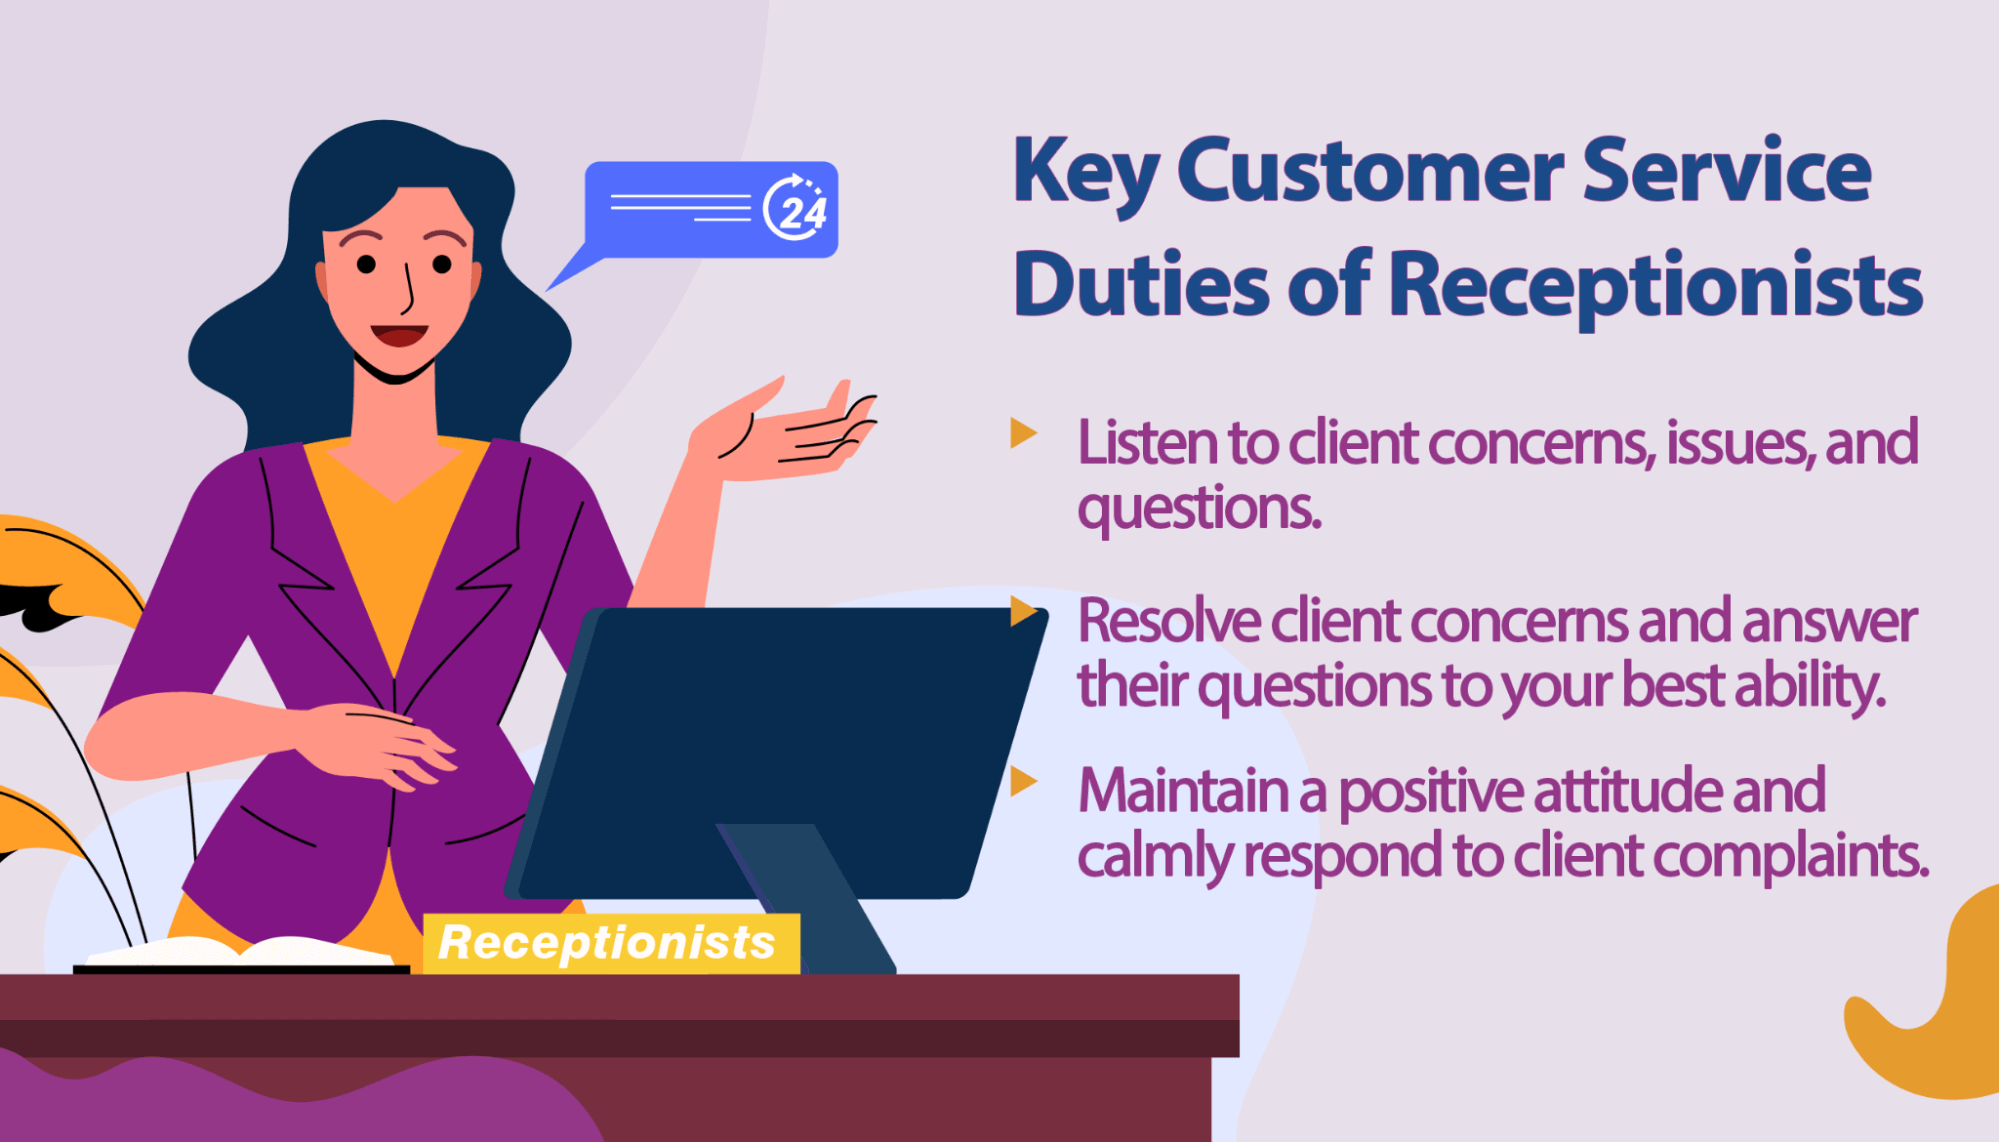 List of the customer service duties that receptionists perform